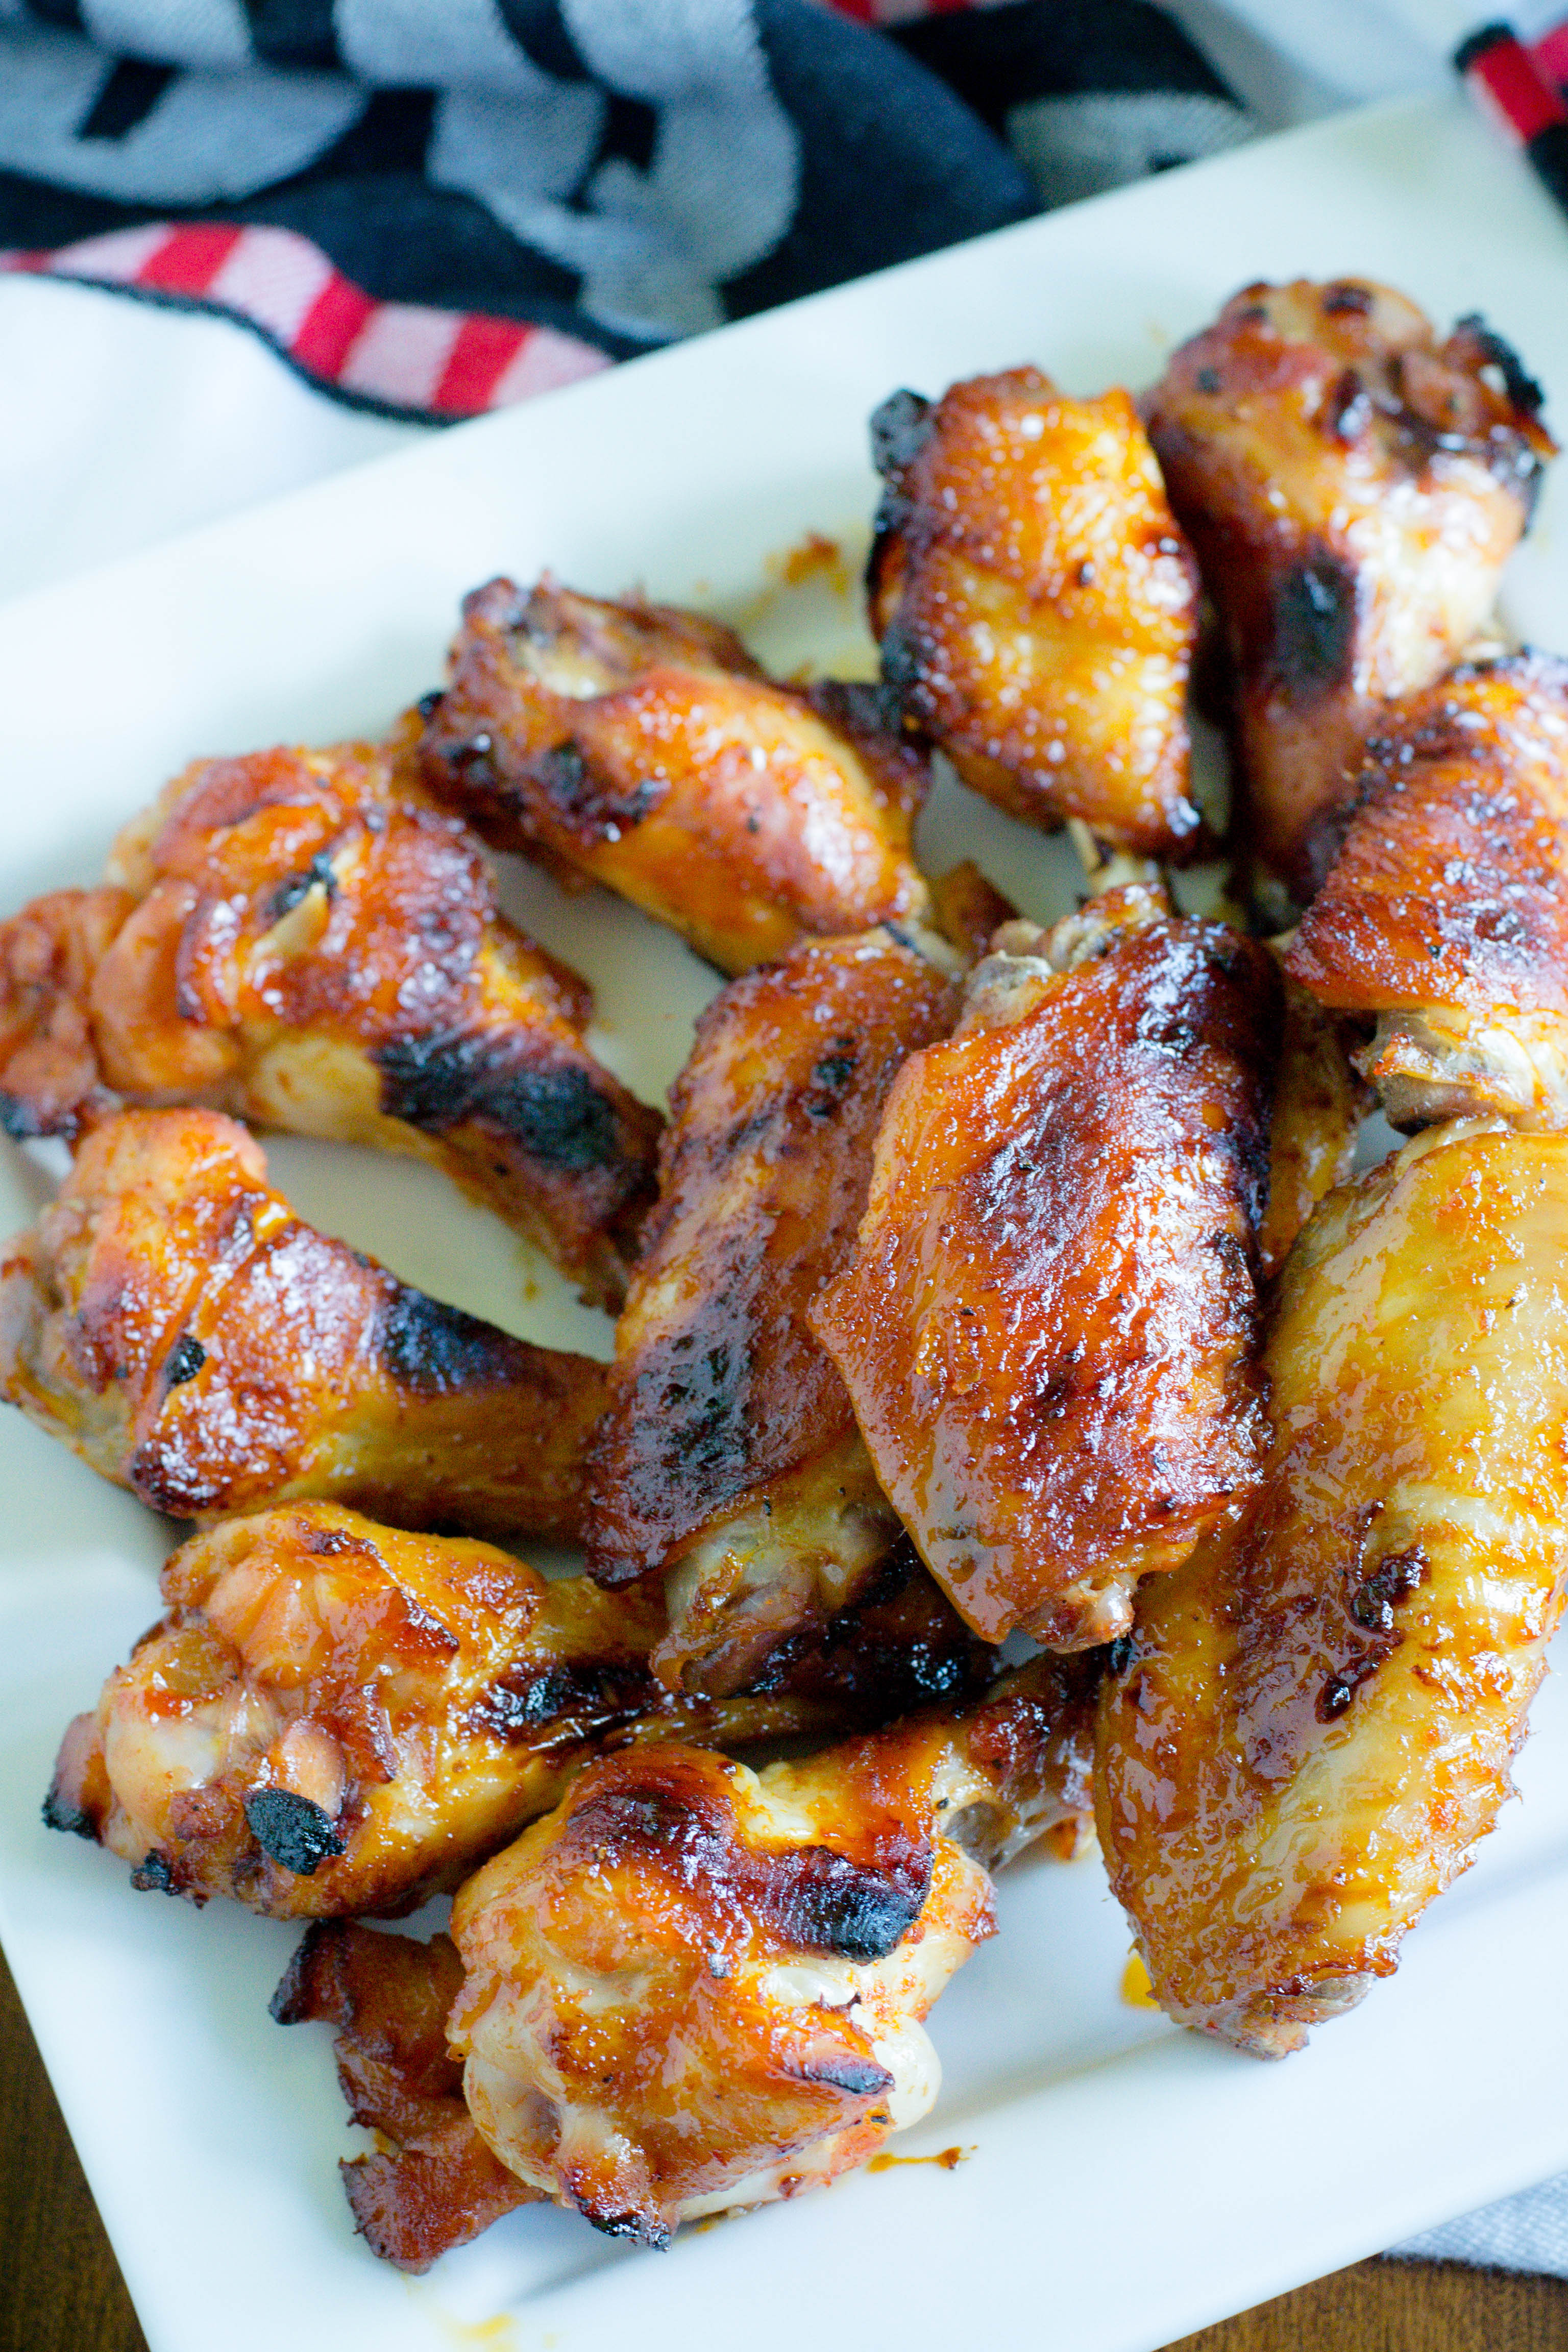 Sriracha Marmalade Wings - What the Forks for Dinner?